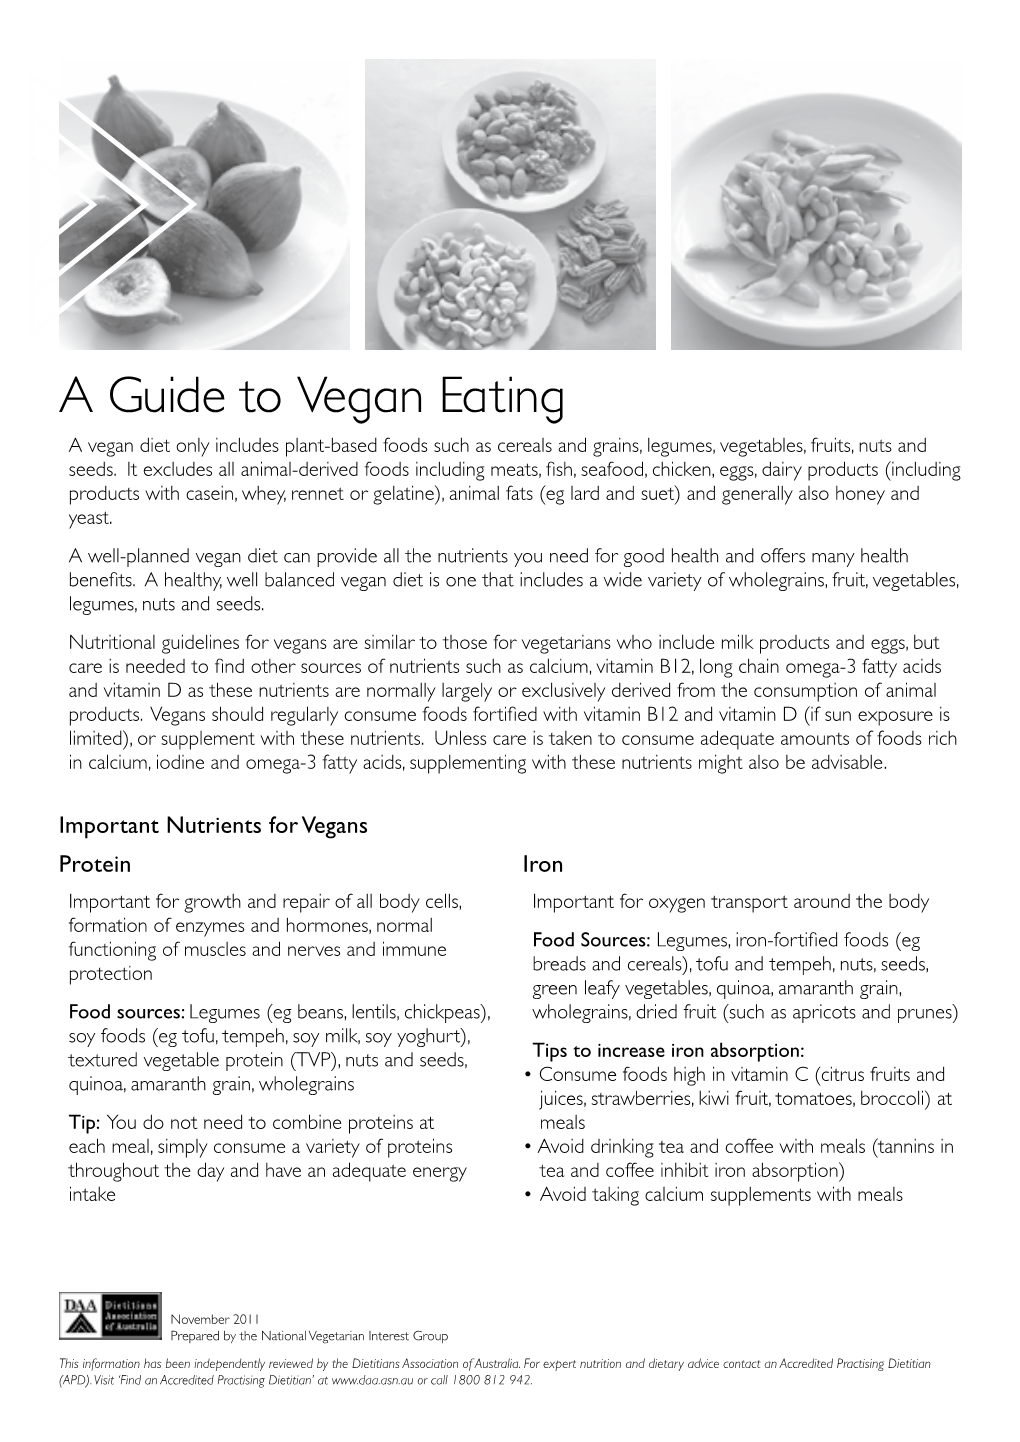 A Guide to Vegan Eating a Vegan Diet Only Includes Plant-Based Foods Such As Cereals and Grains, Legumes, Vegetables, Fruits, Nuts and Seeds